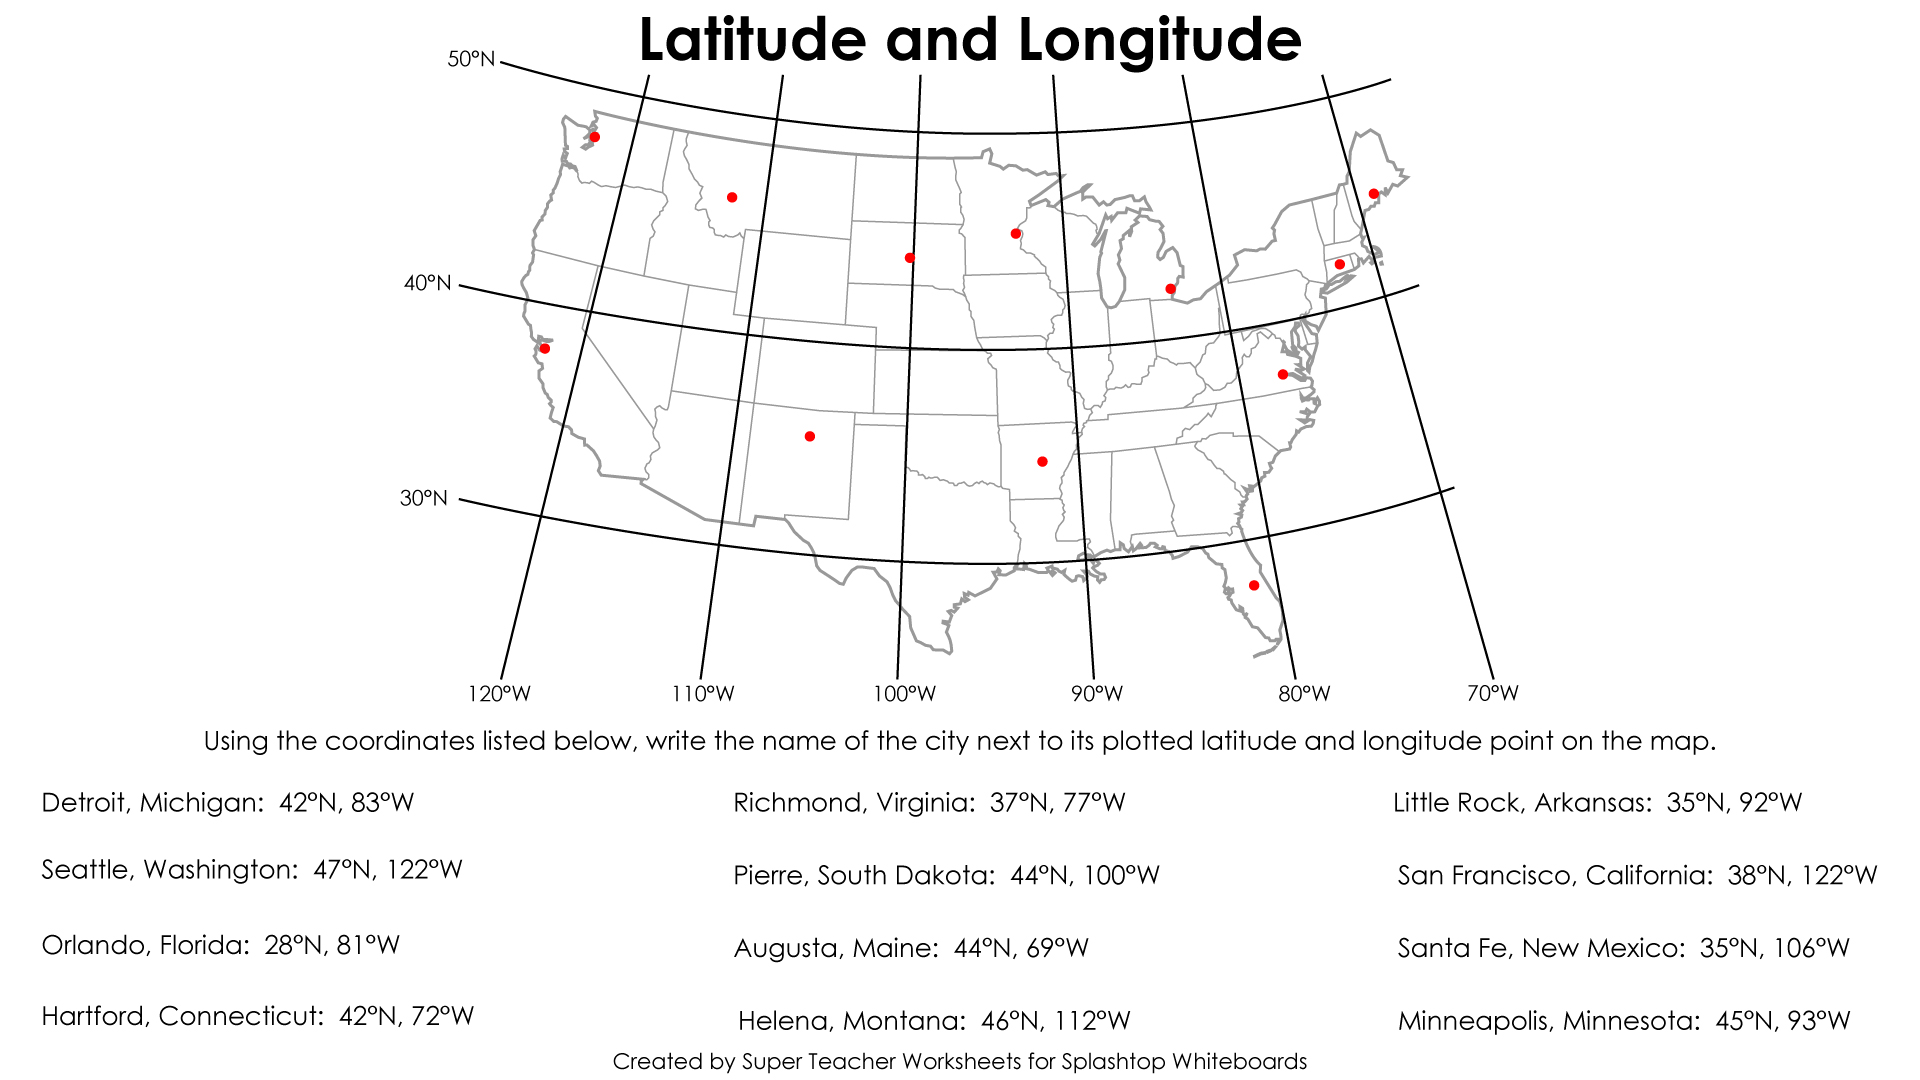 19-best-images-of-latitude-and-longitude-places-worksheets-longitude-and-latitude-worksheets